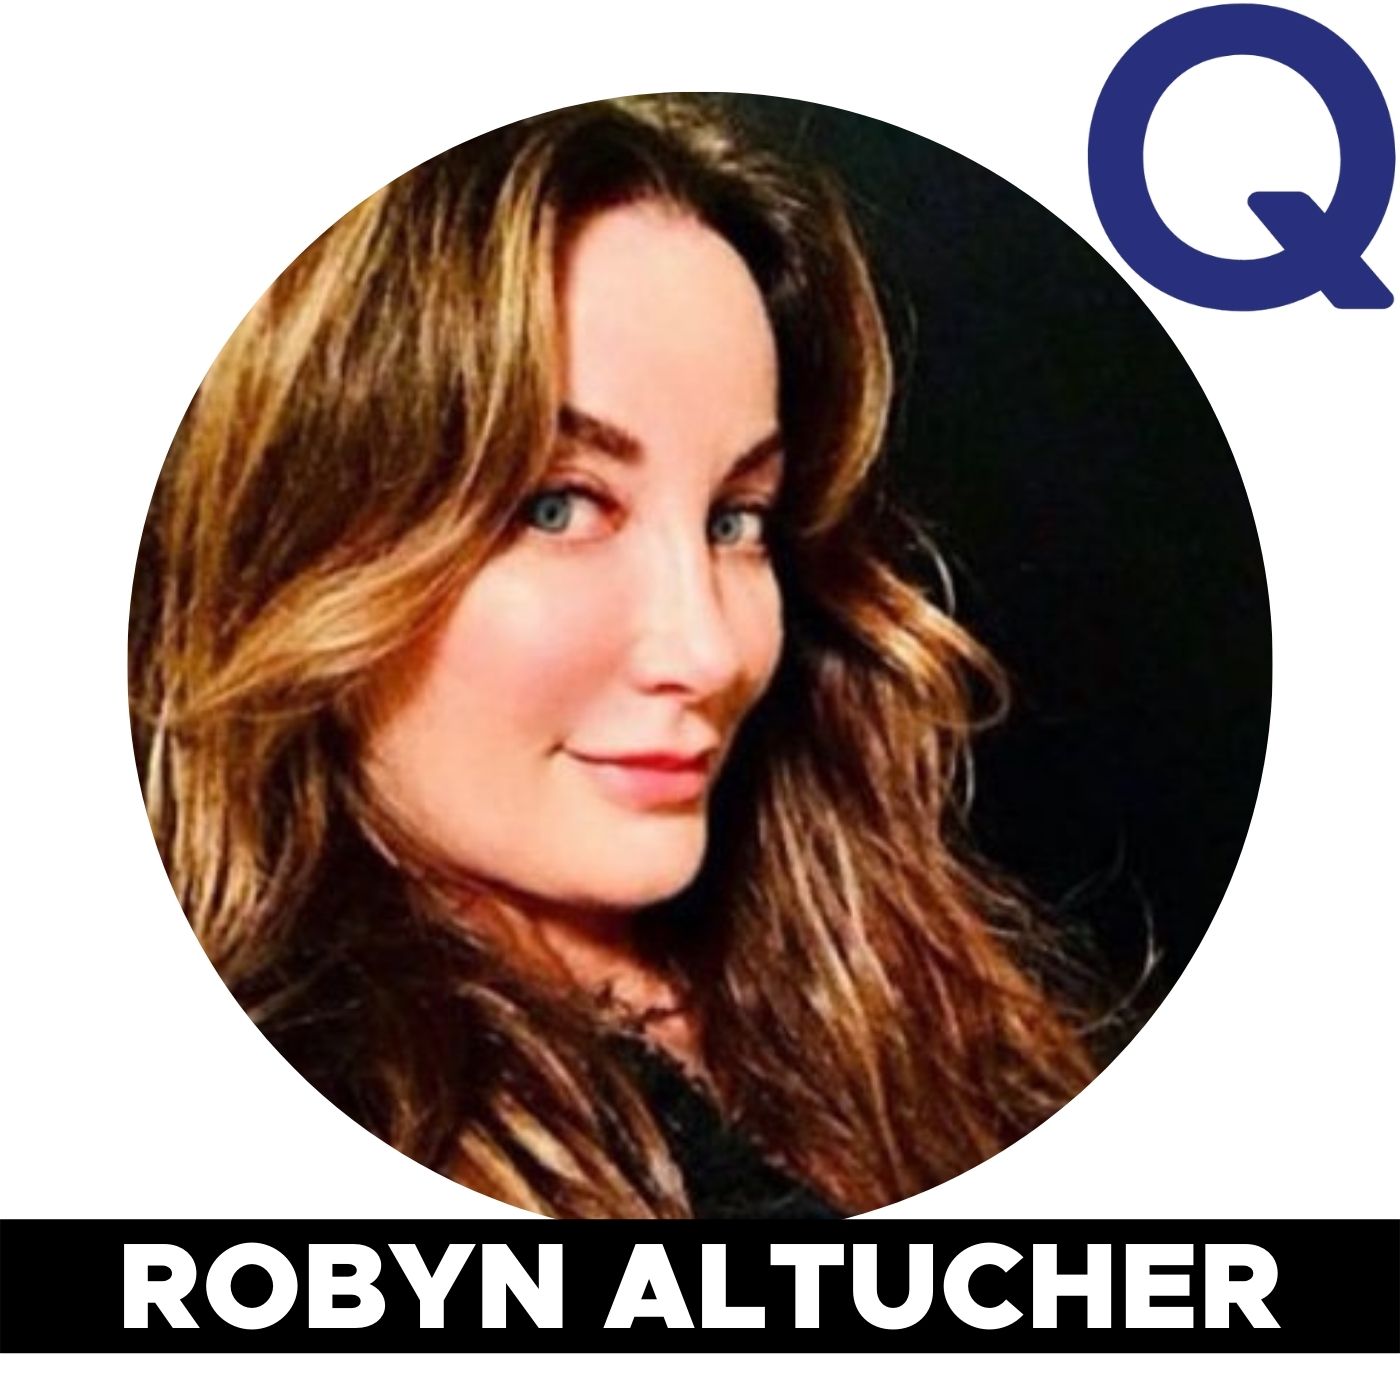 Robyn Altucher on Quality Friendship, the Dangers of Gossip, and Intuitive and Intentional Child Rearing (Part 2 of 2)